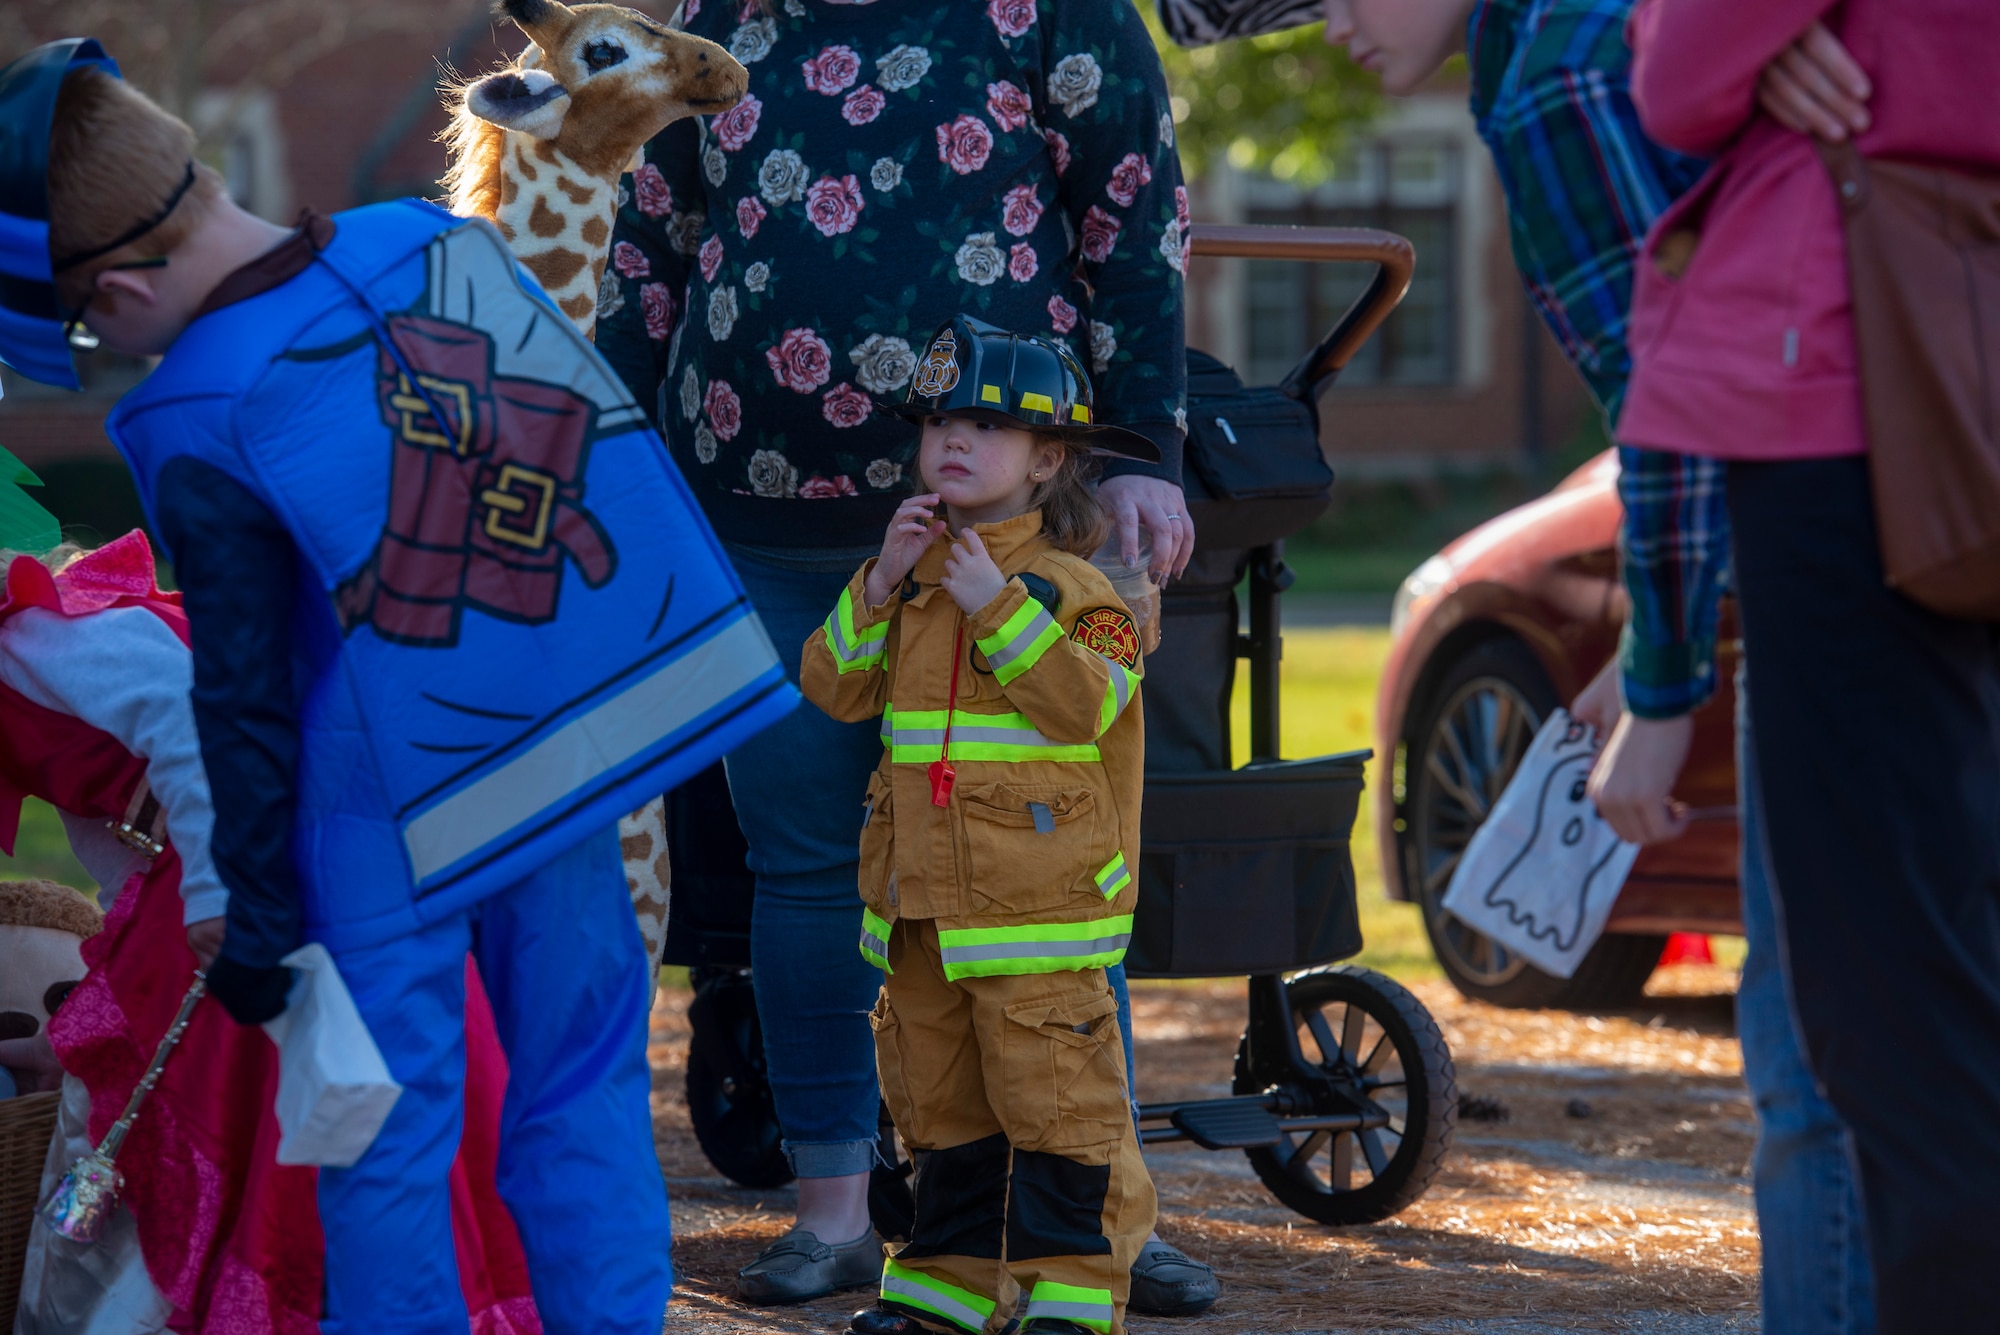 Child participates in the “Truck or Treat” event.